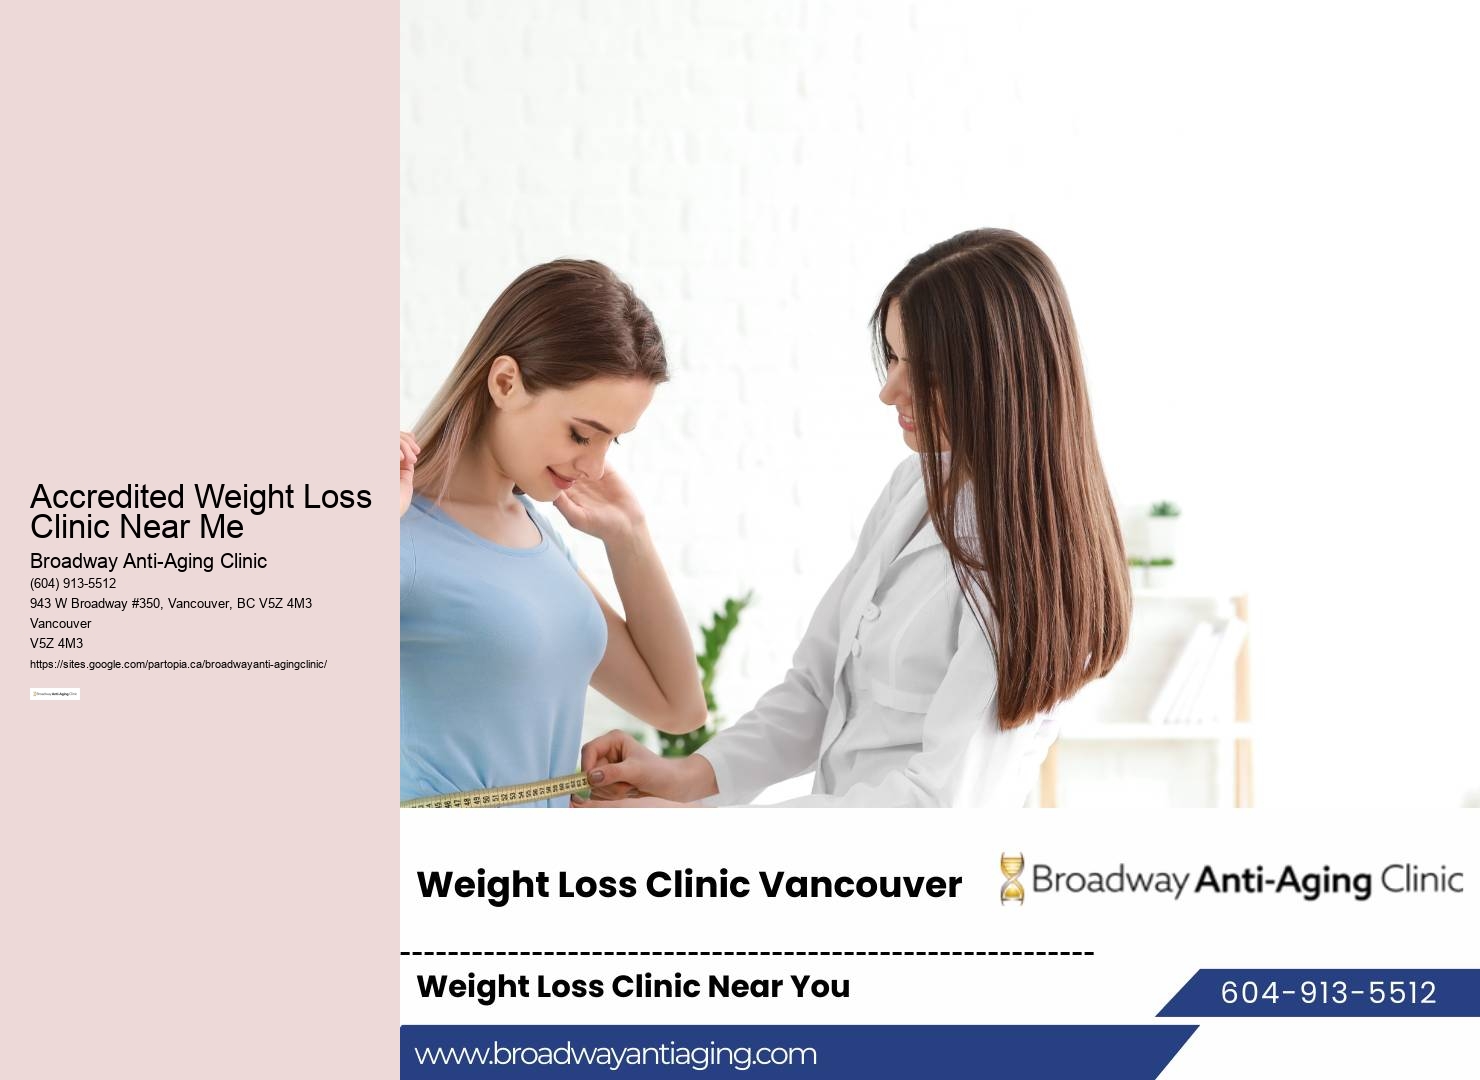 Accredited Weight Loss Clinic Near Me